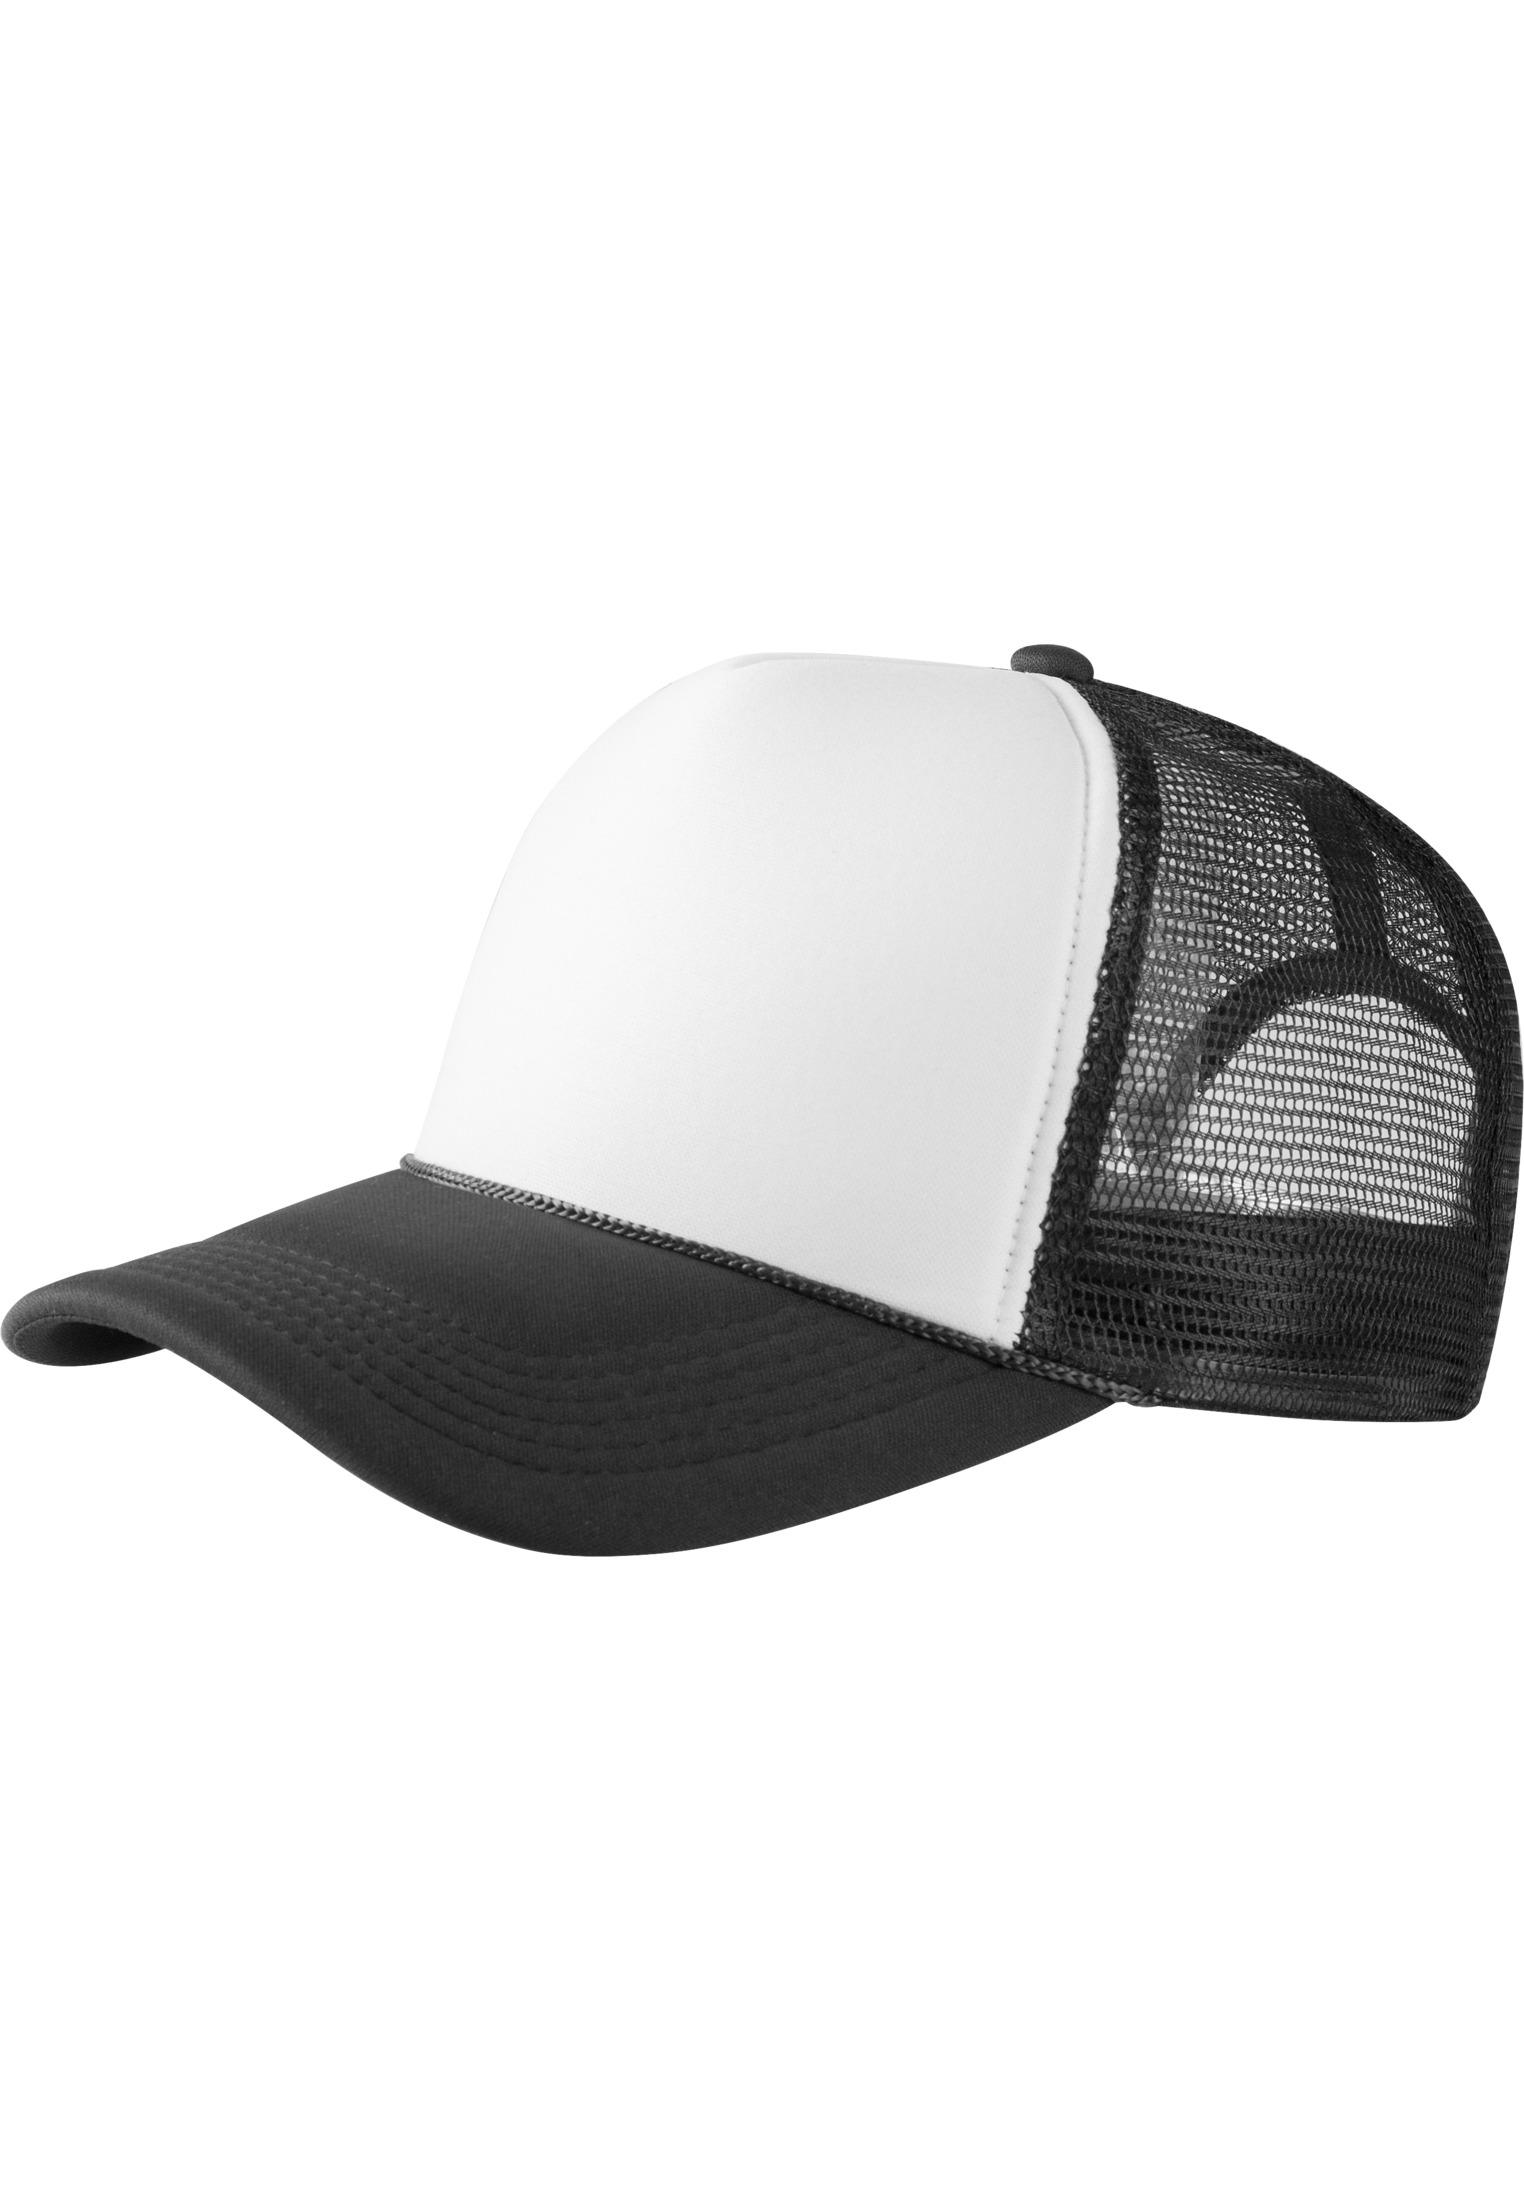 Fitted cap profile picture